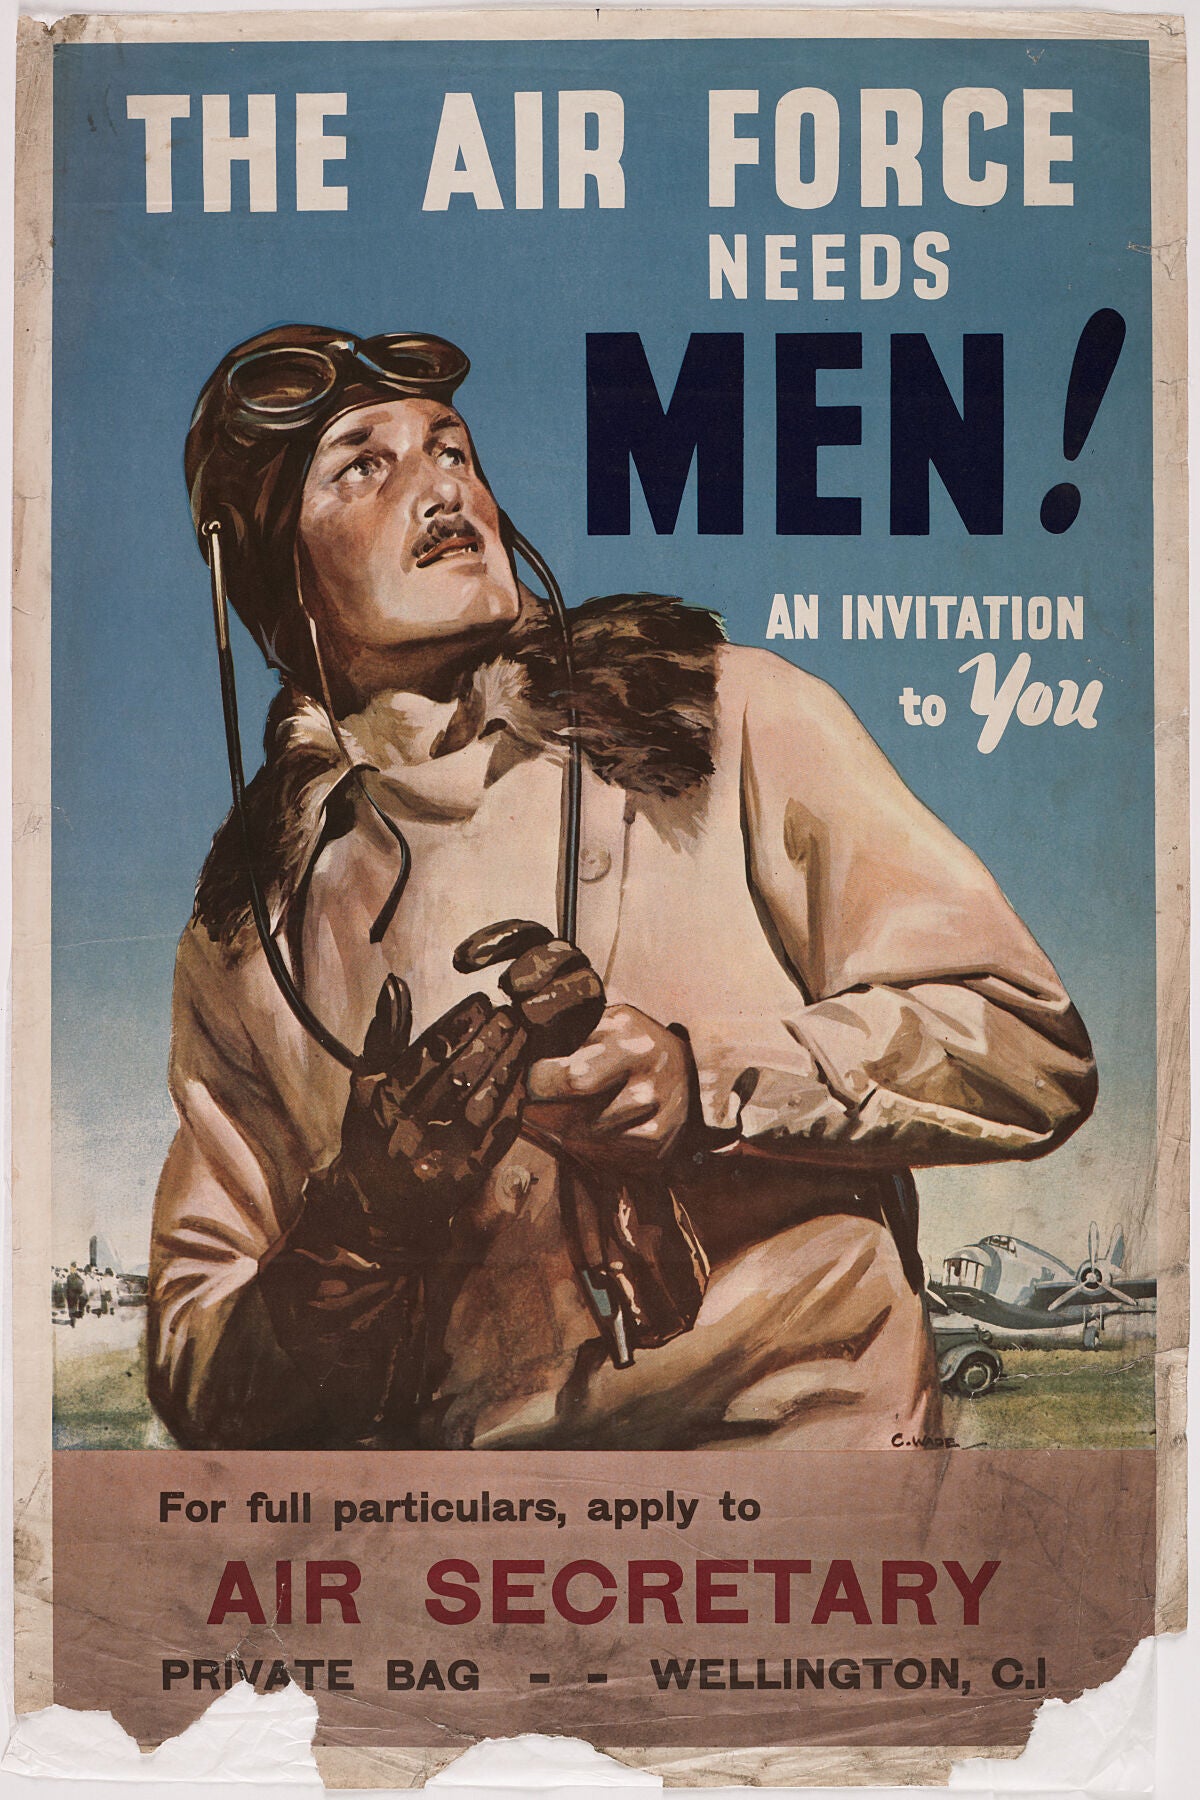 Poster, 'The Air Force Needs Men!', Early 1941, Wellington, by Claude Wade.